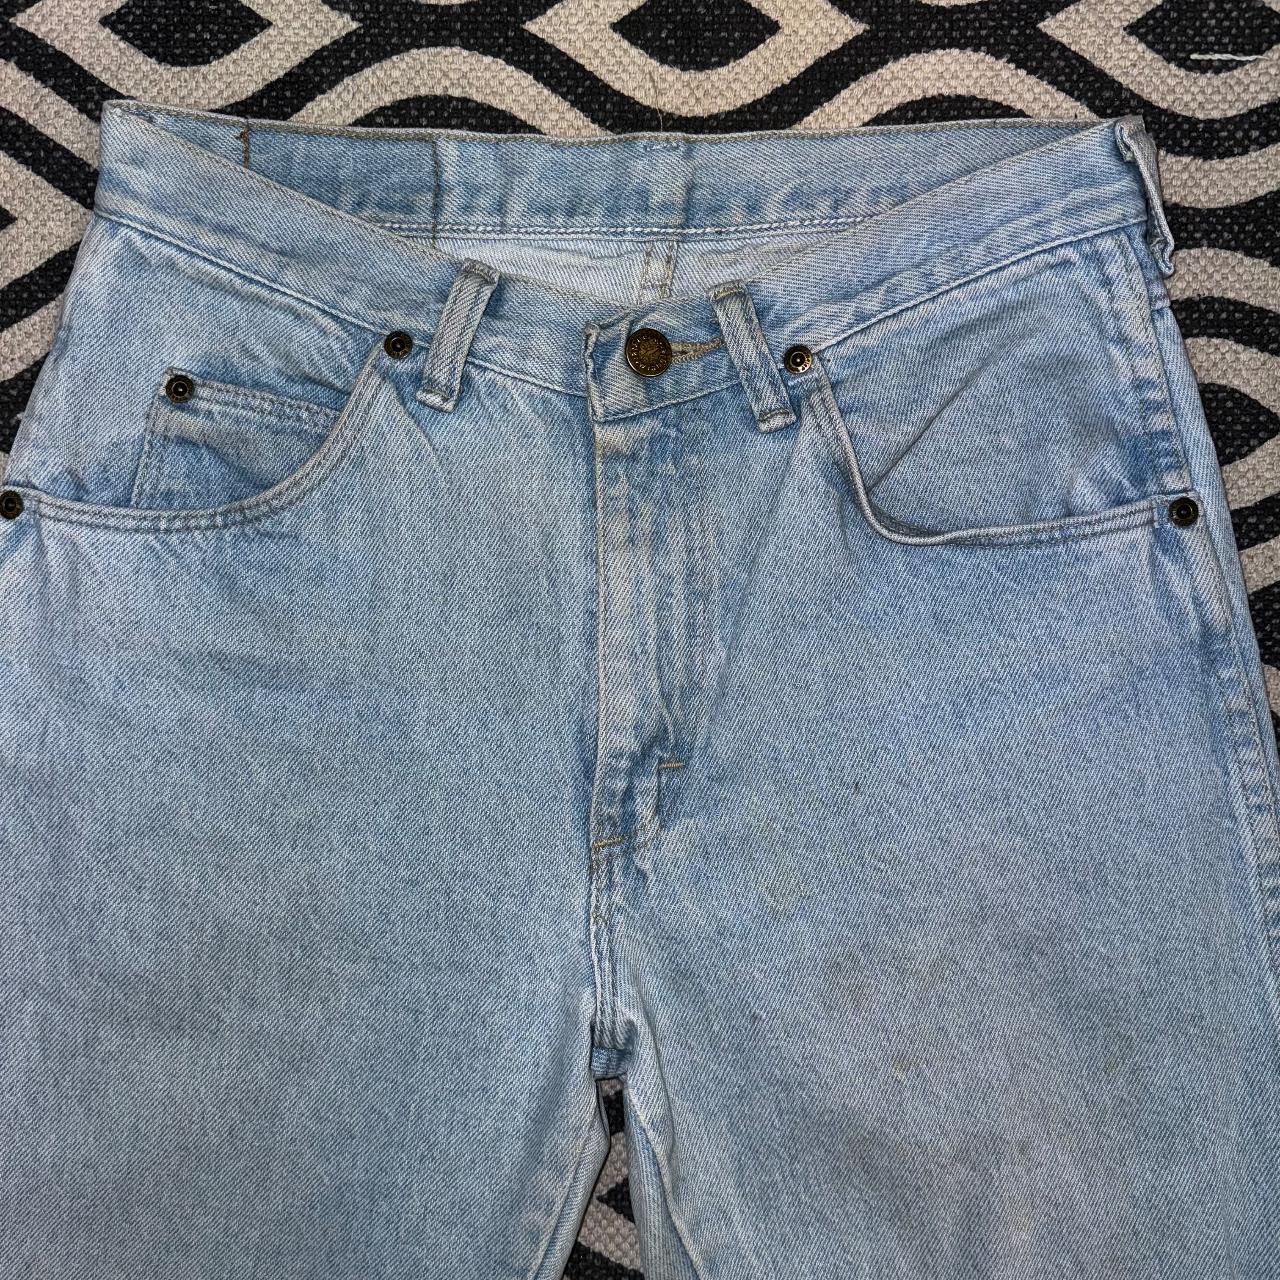 About - Classic Wrangler jeans in a light blue... - Depop